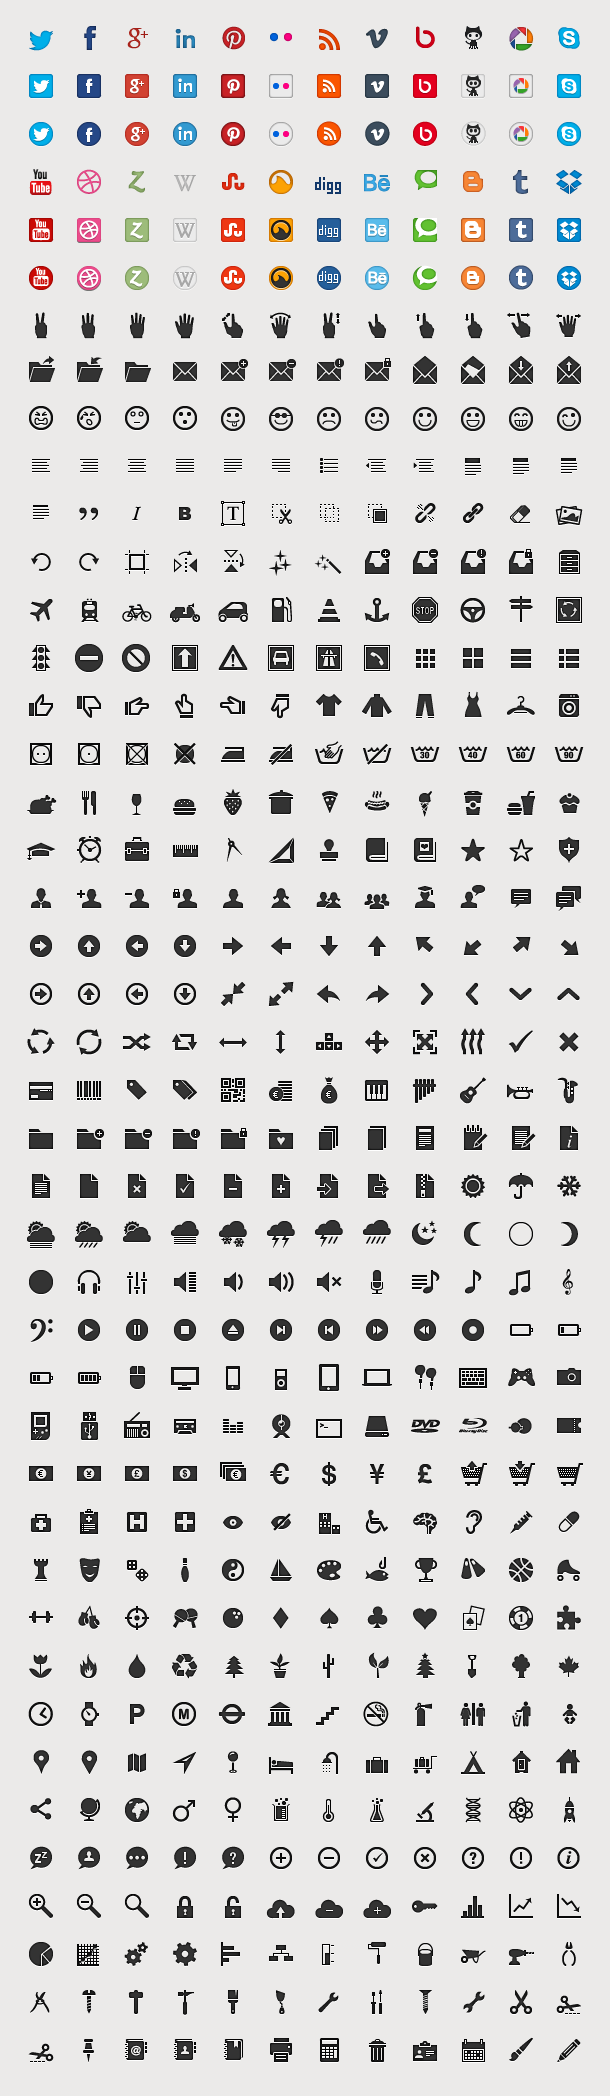 Free PNG Icons - Download Now!